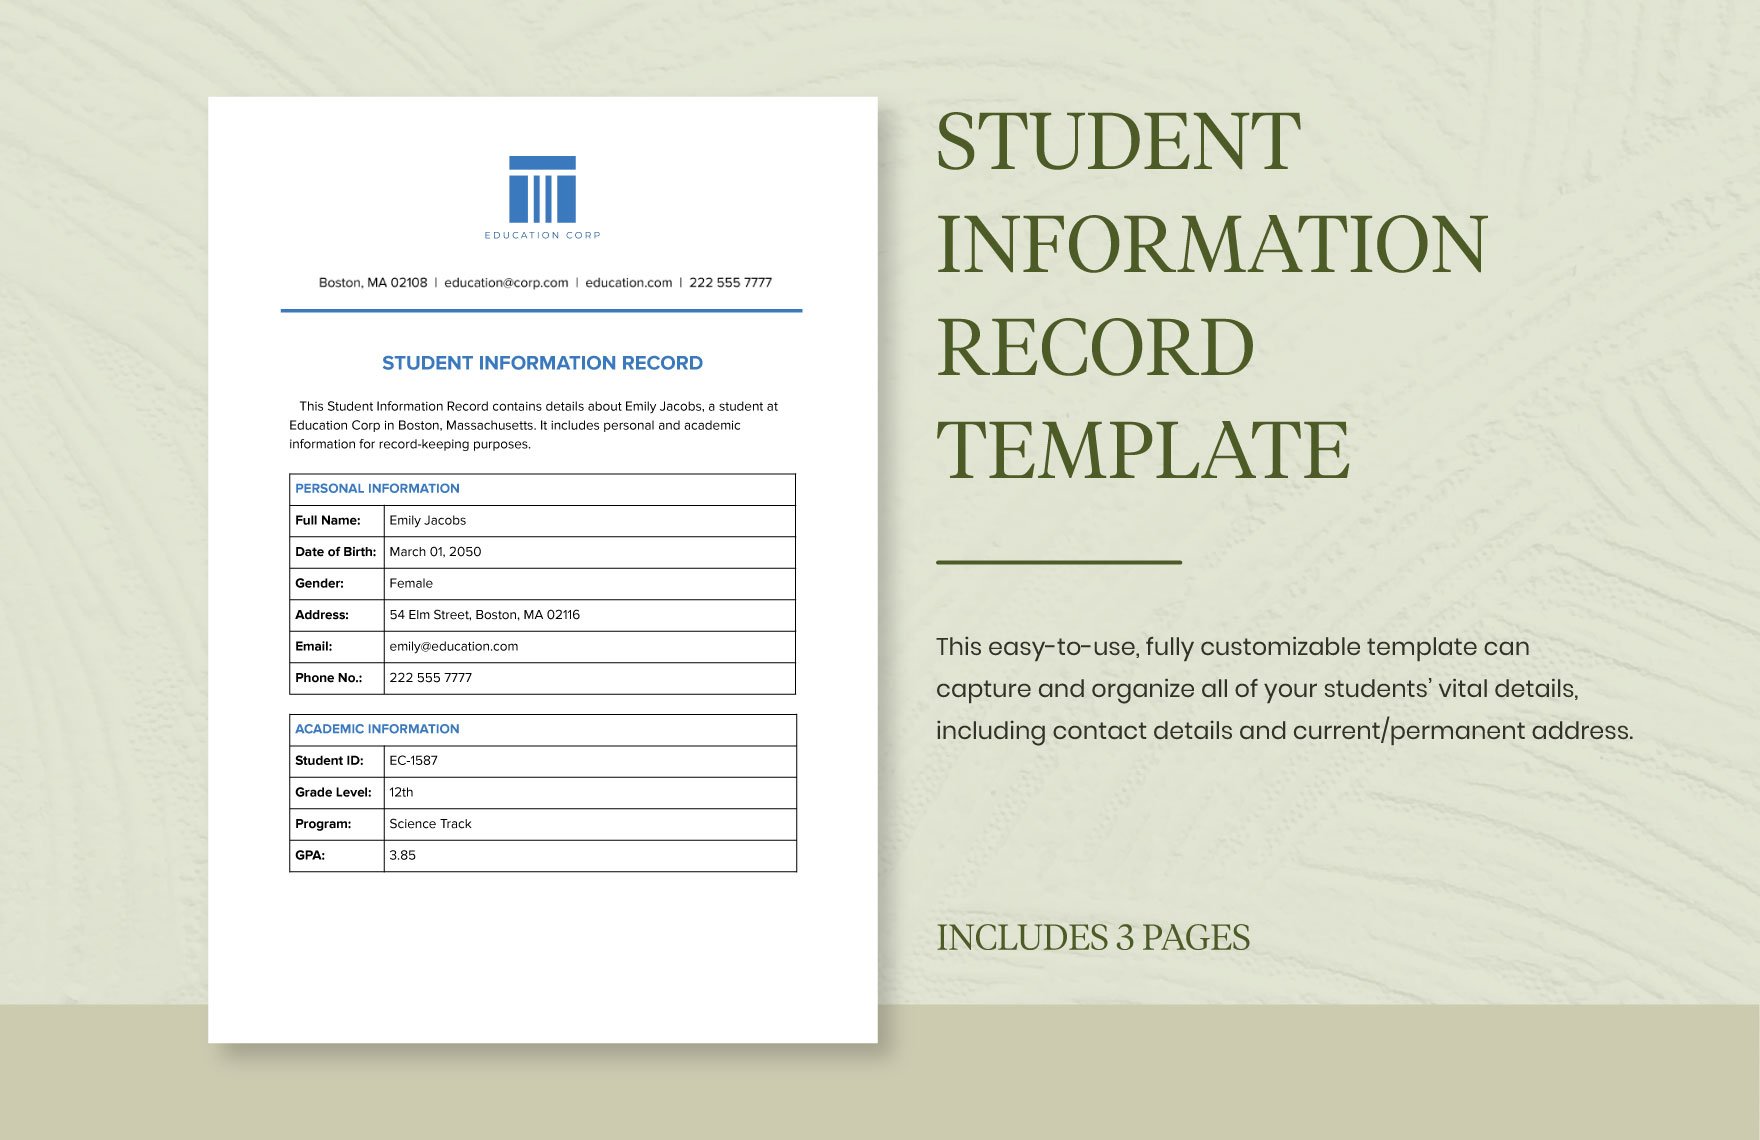 Student Information Record Template in Word, Google Docs, PDF